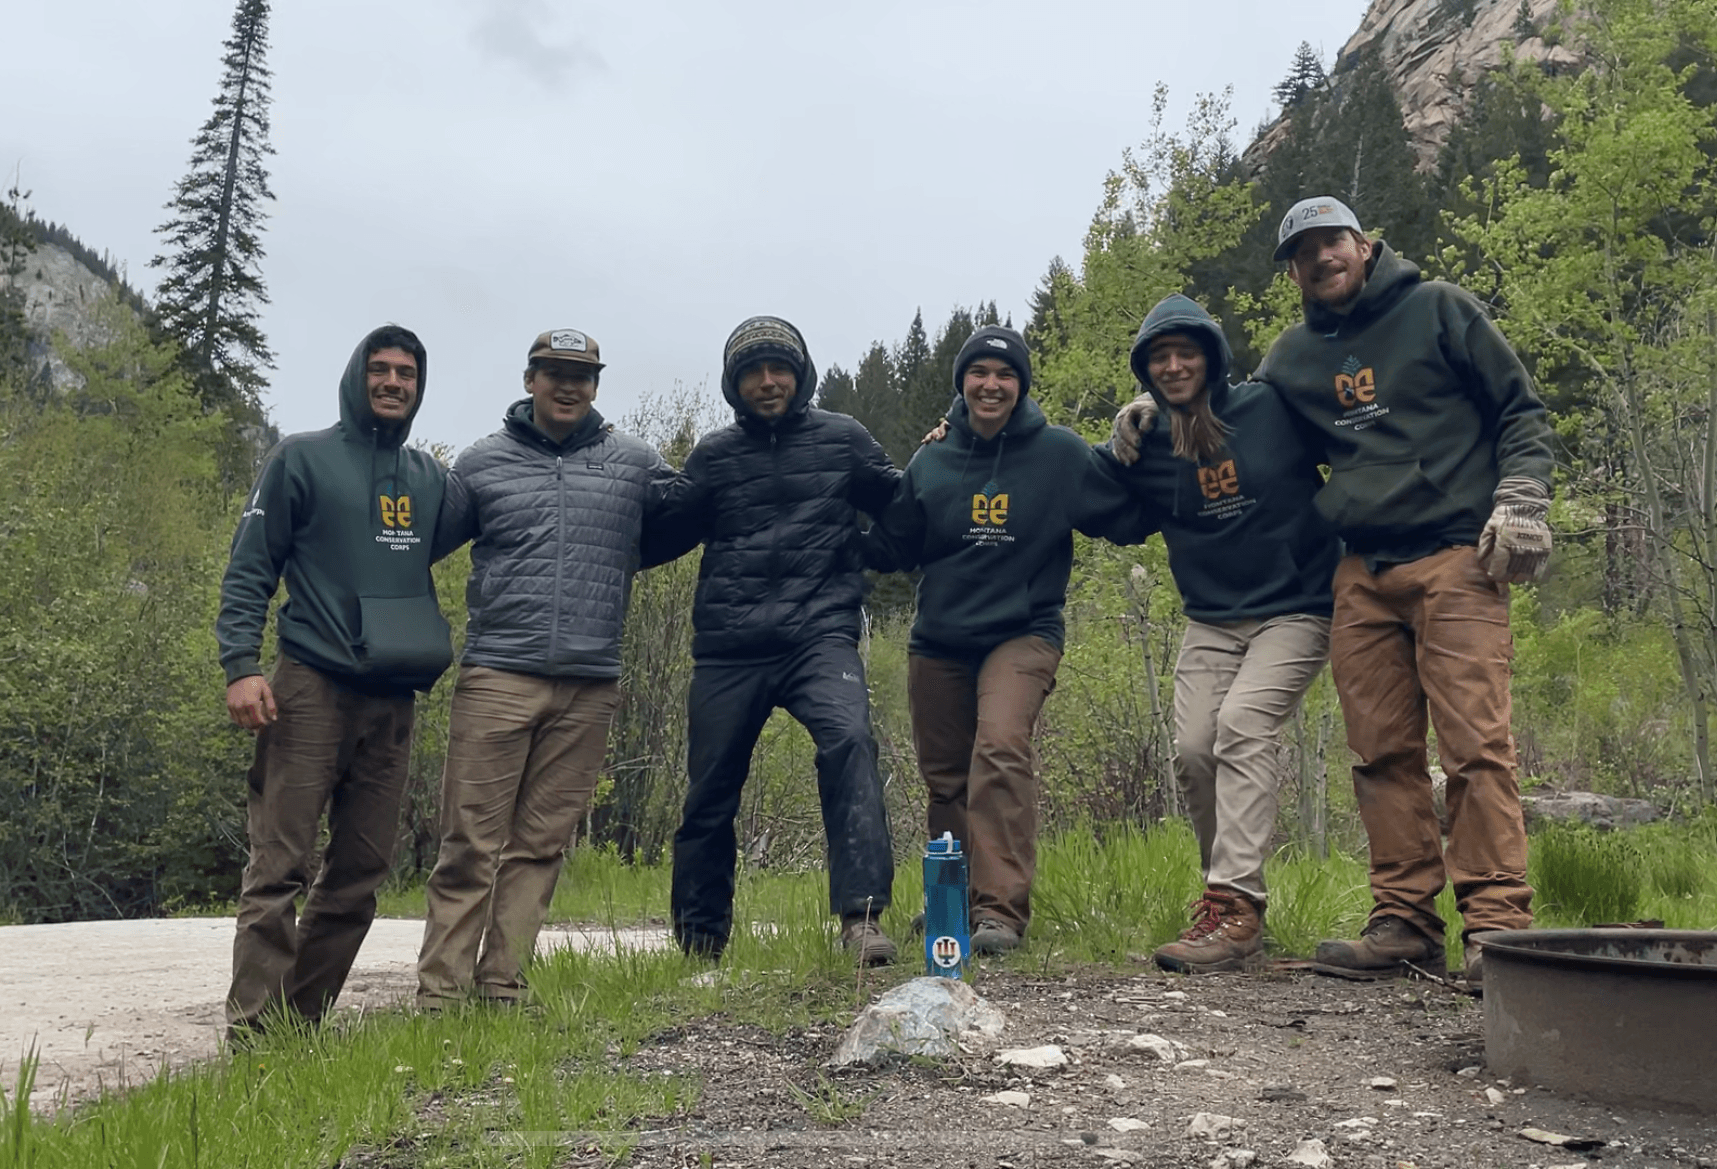 A crew poses together behind a fire ring. They are all bundled up in the cold and their is overcast sky and a hillside with trees and undergrowth behind them.